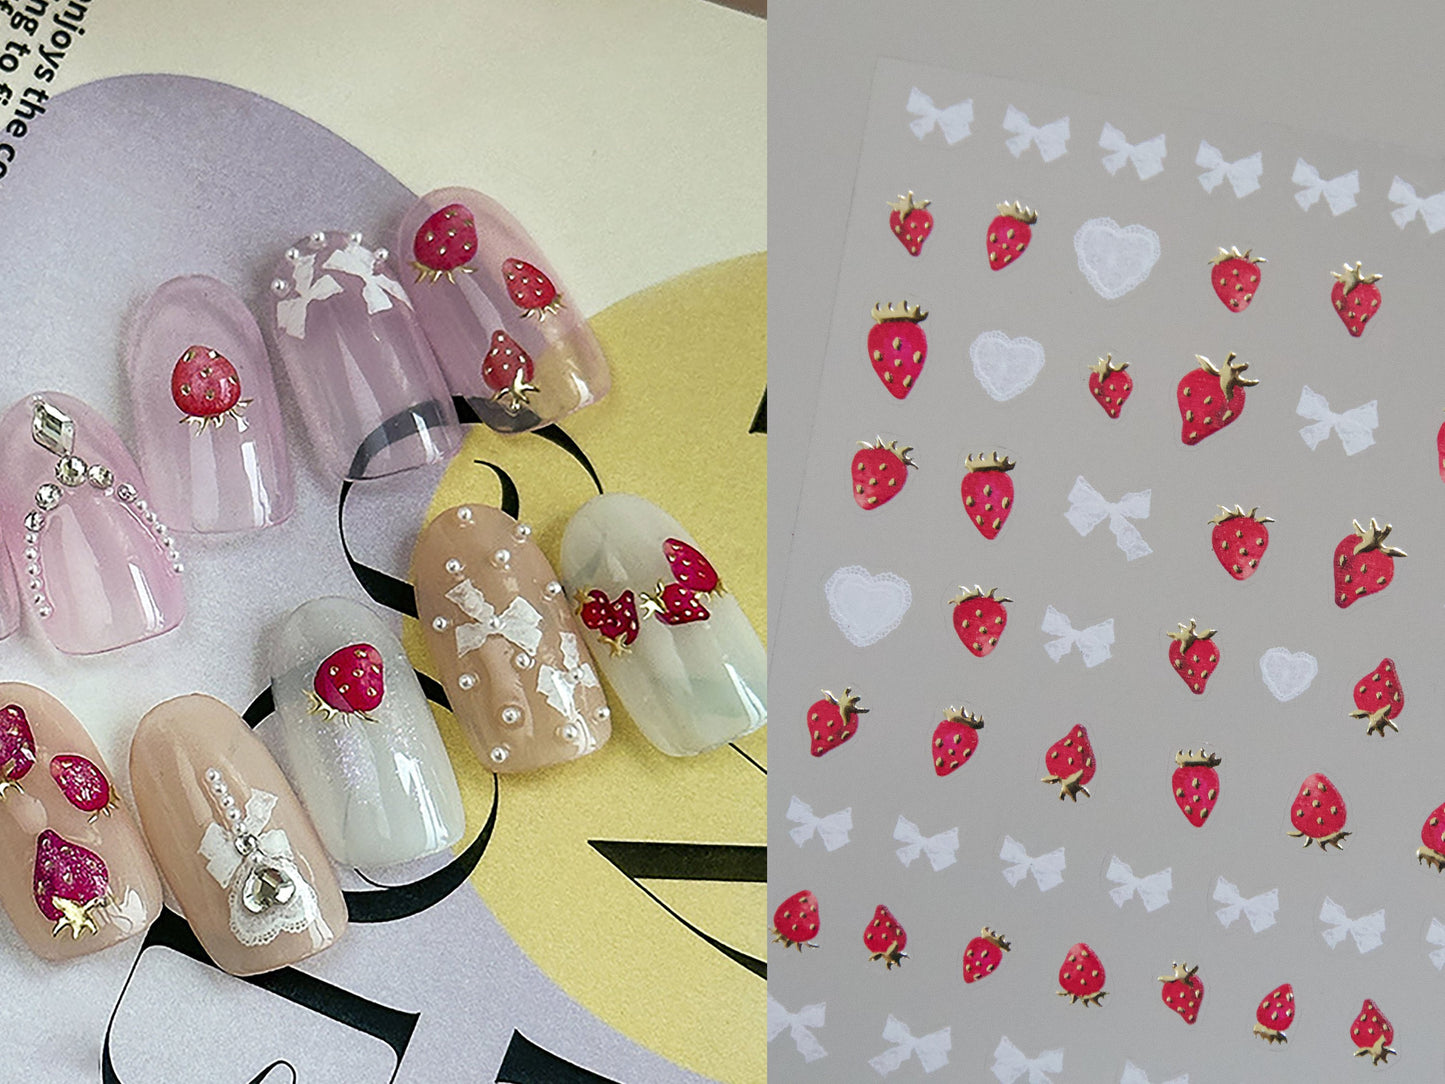 Strawberry & Bow Tie Nail sticker/ Gilding Gold Leaf Kawaii Red Strawberry White Lace Self Adhesive Decals/ Cute Fruity Manicure Stickers